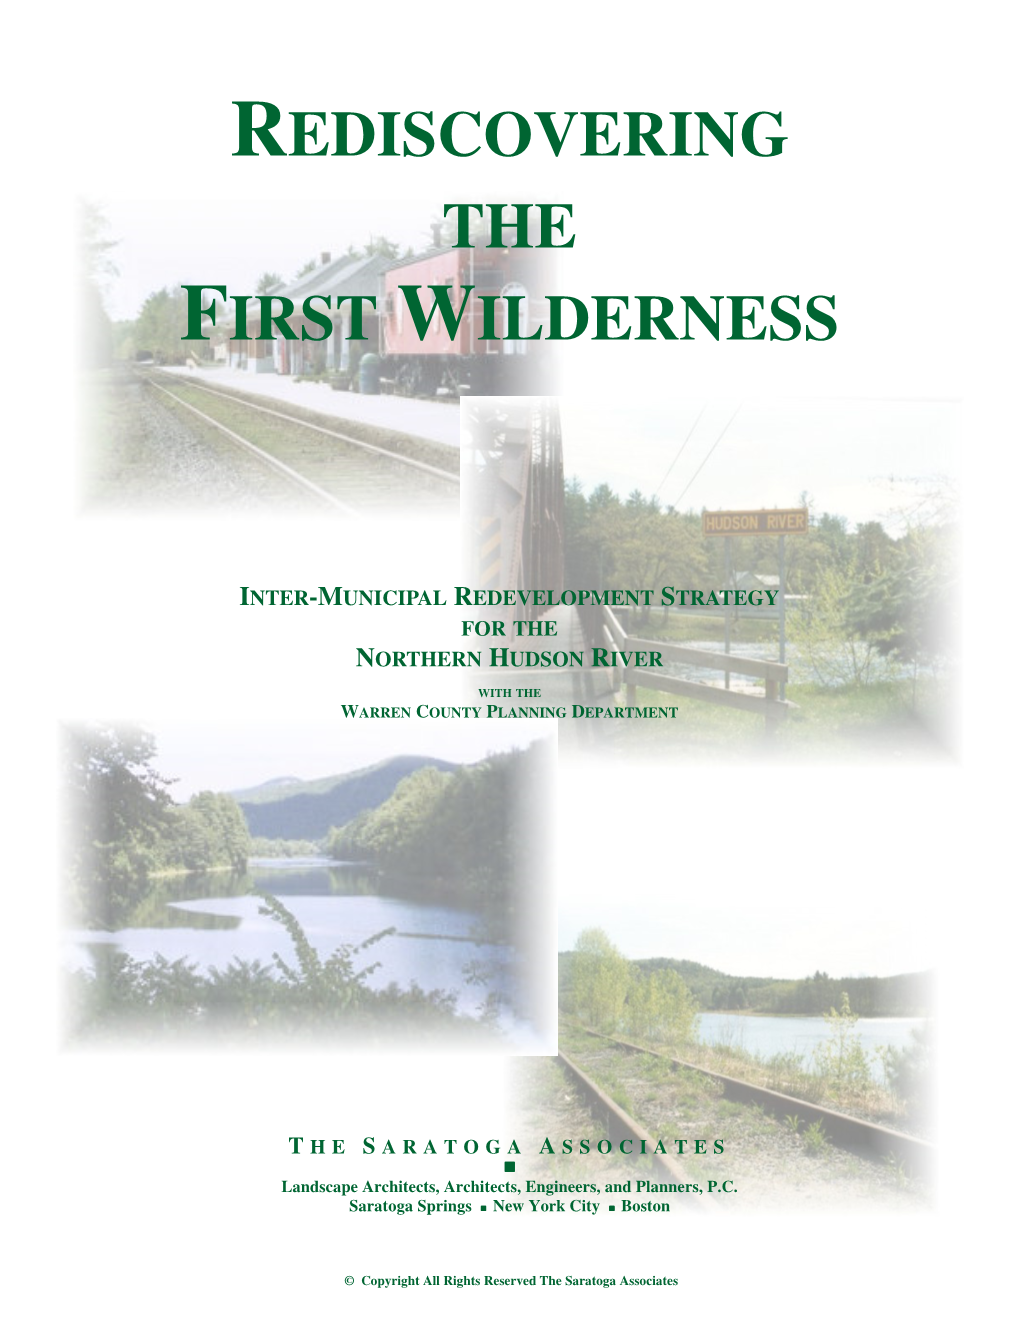 Rediscovering the First Wilderness